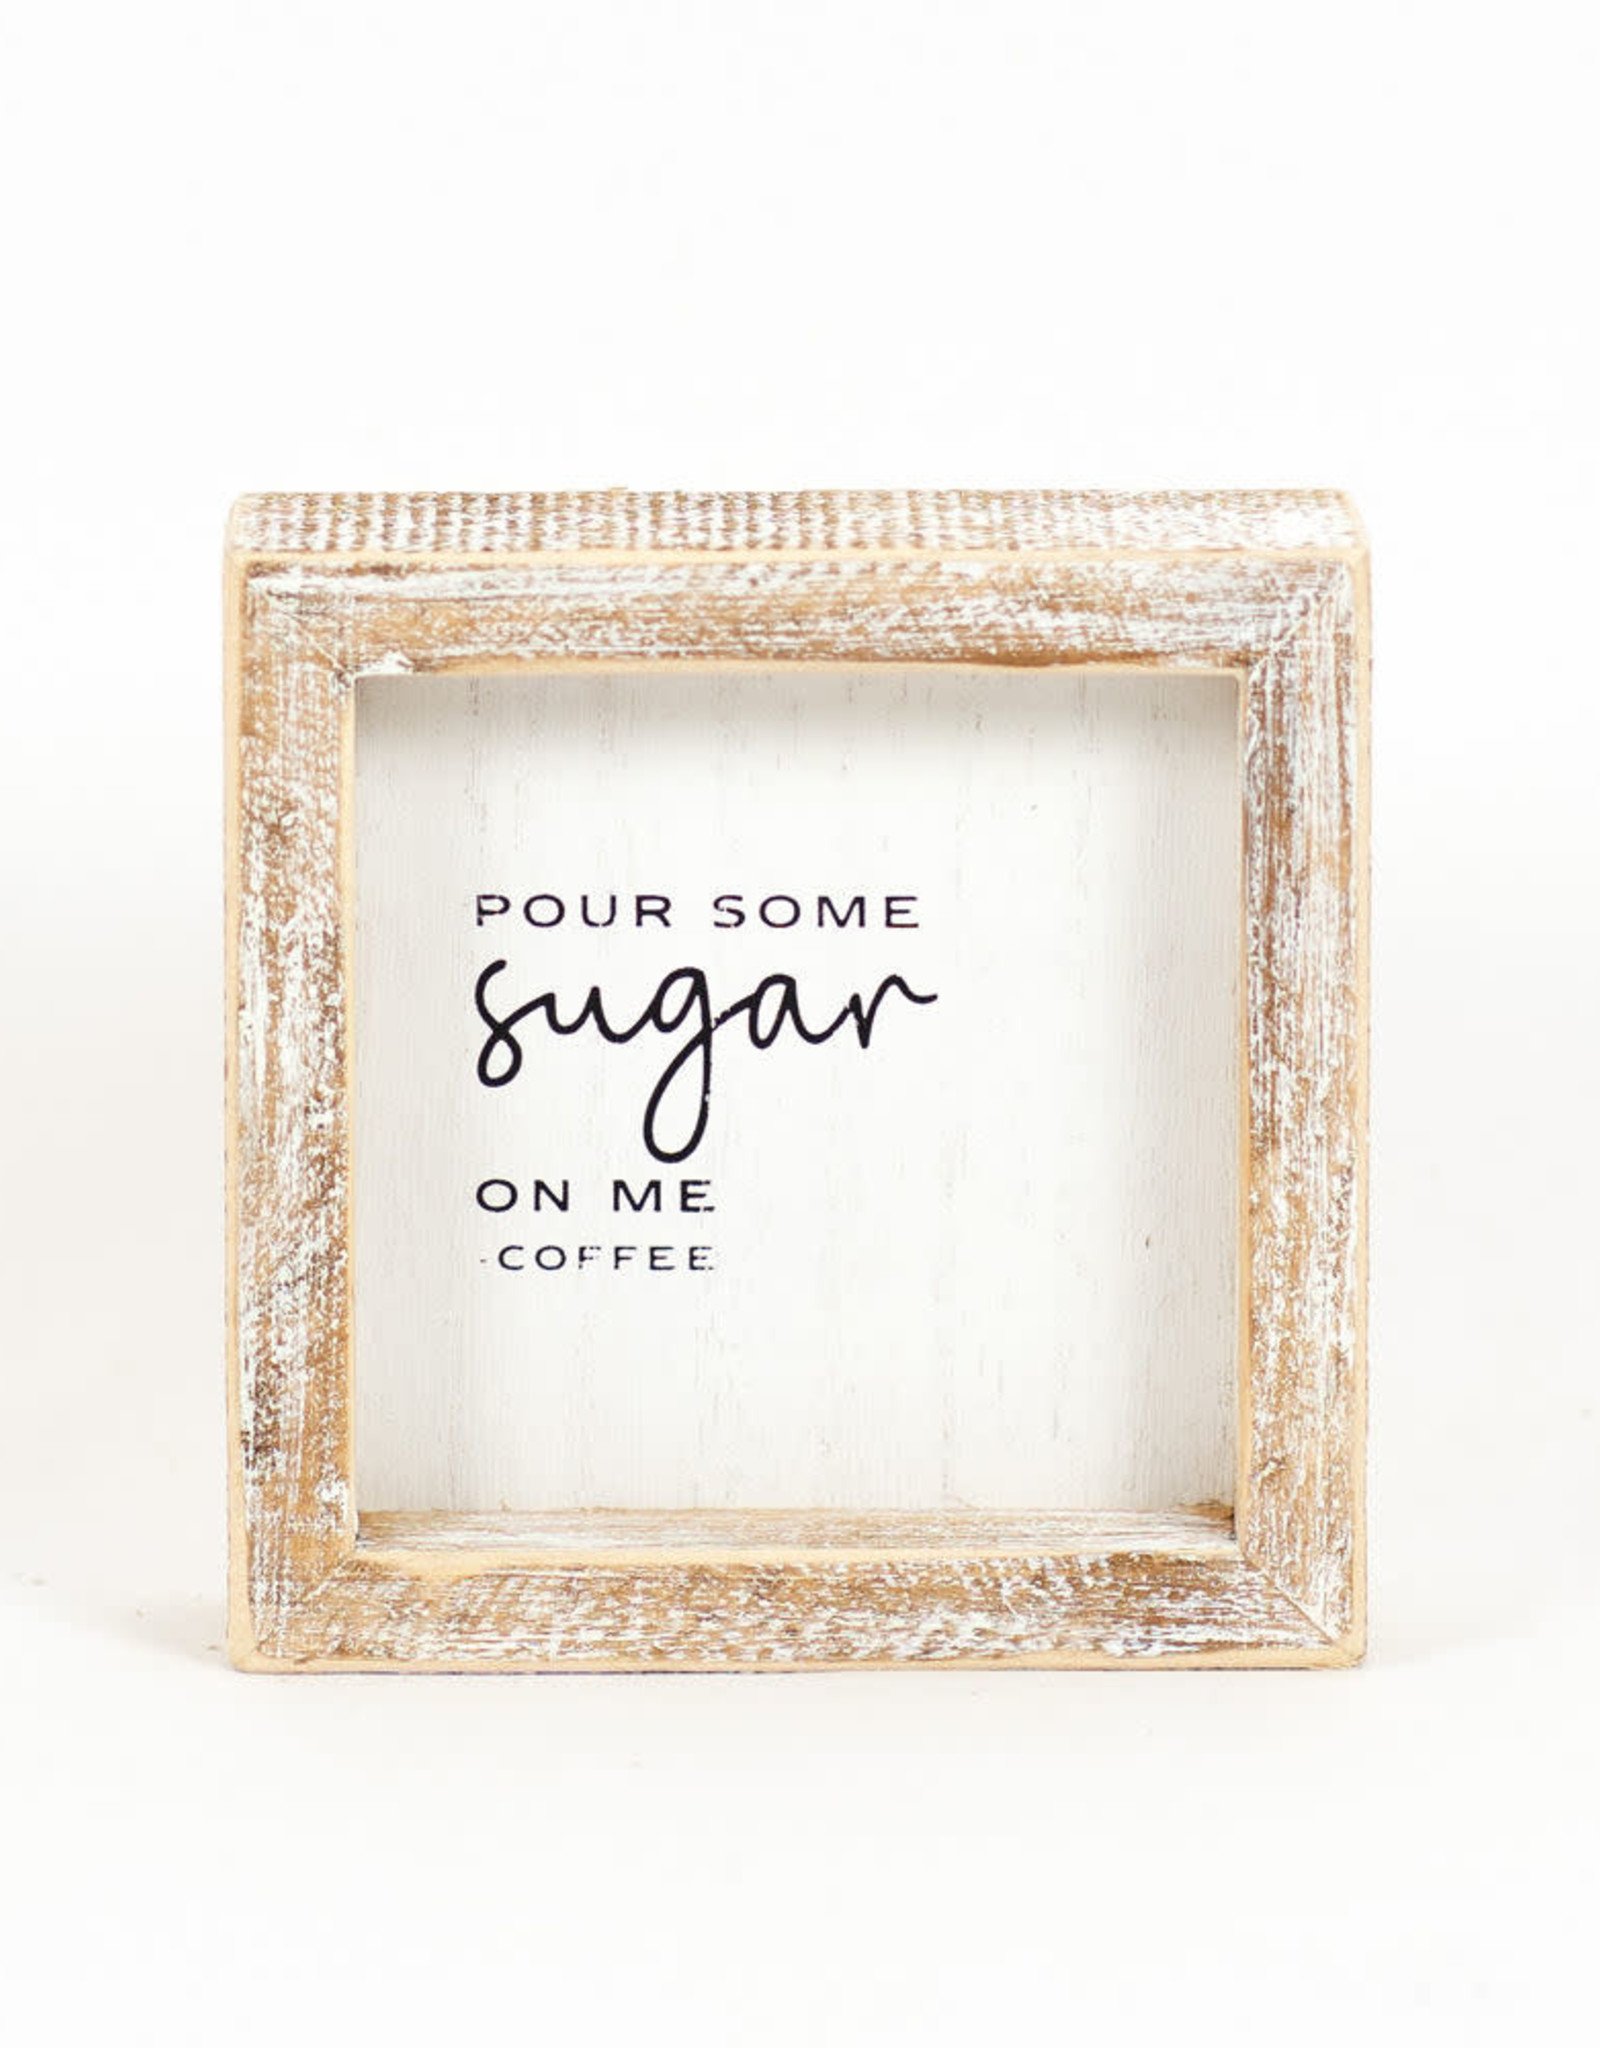 Pour Some Sugar on Me' Coffee Wood Box Sign